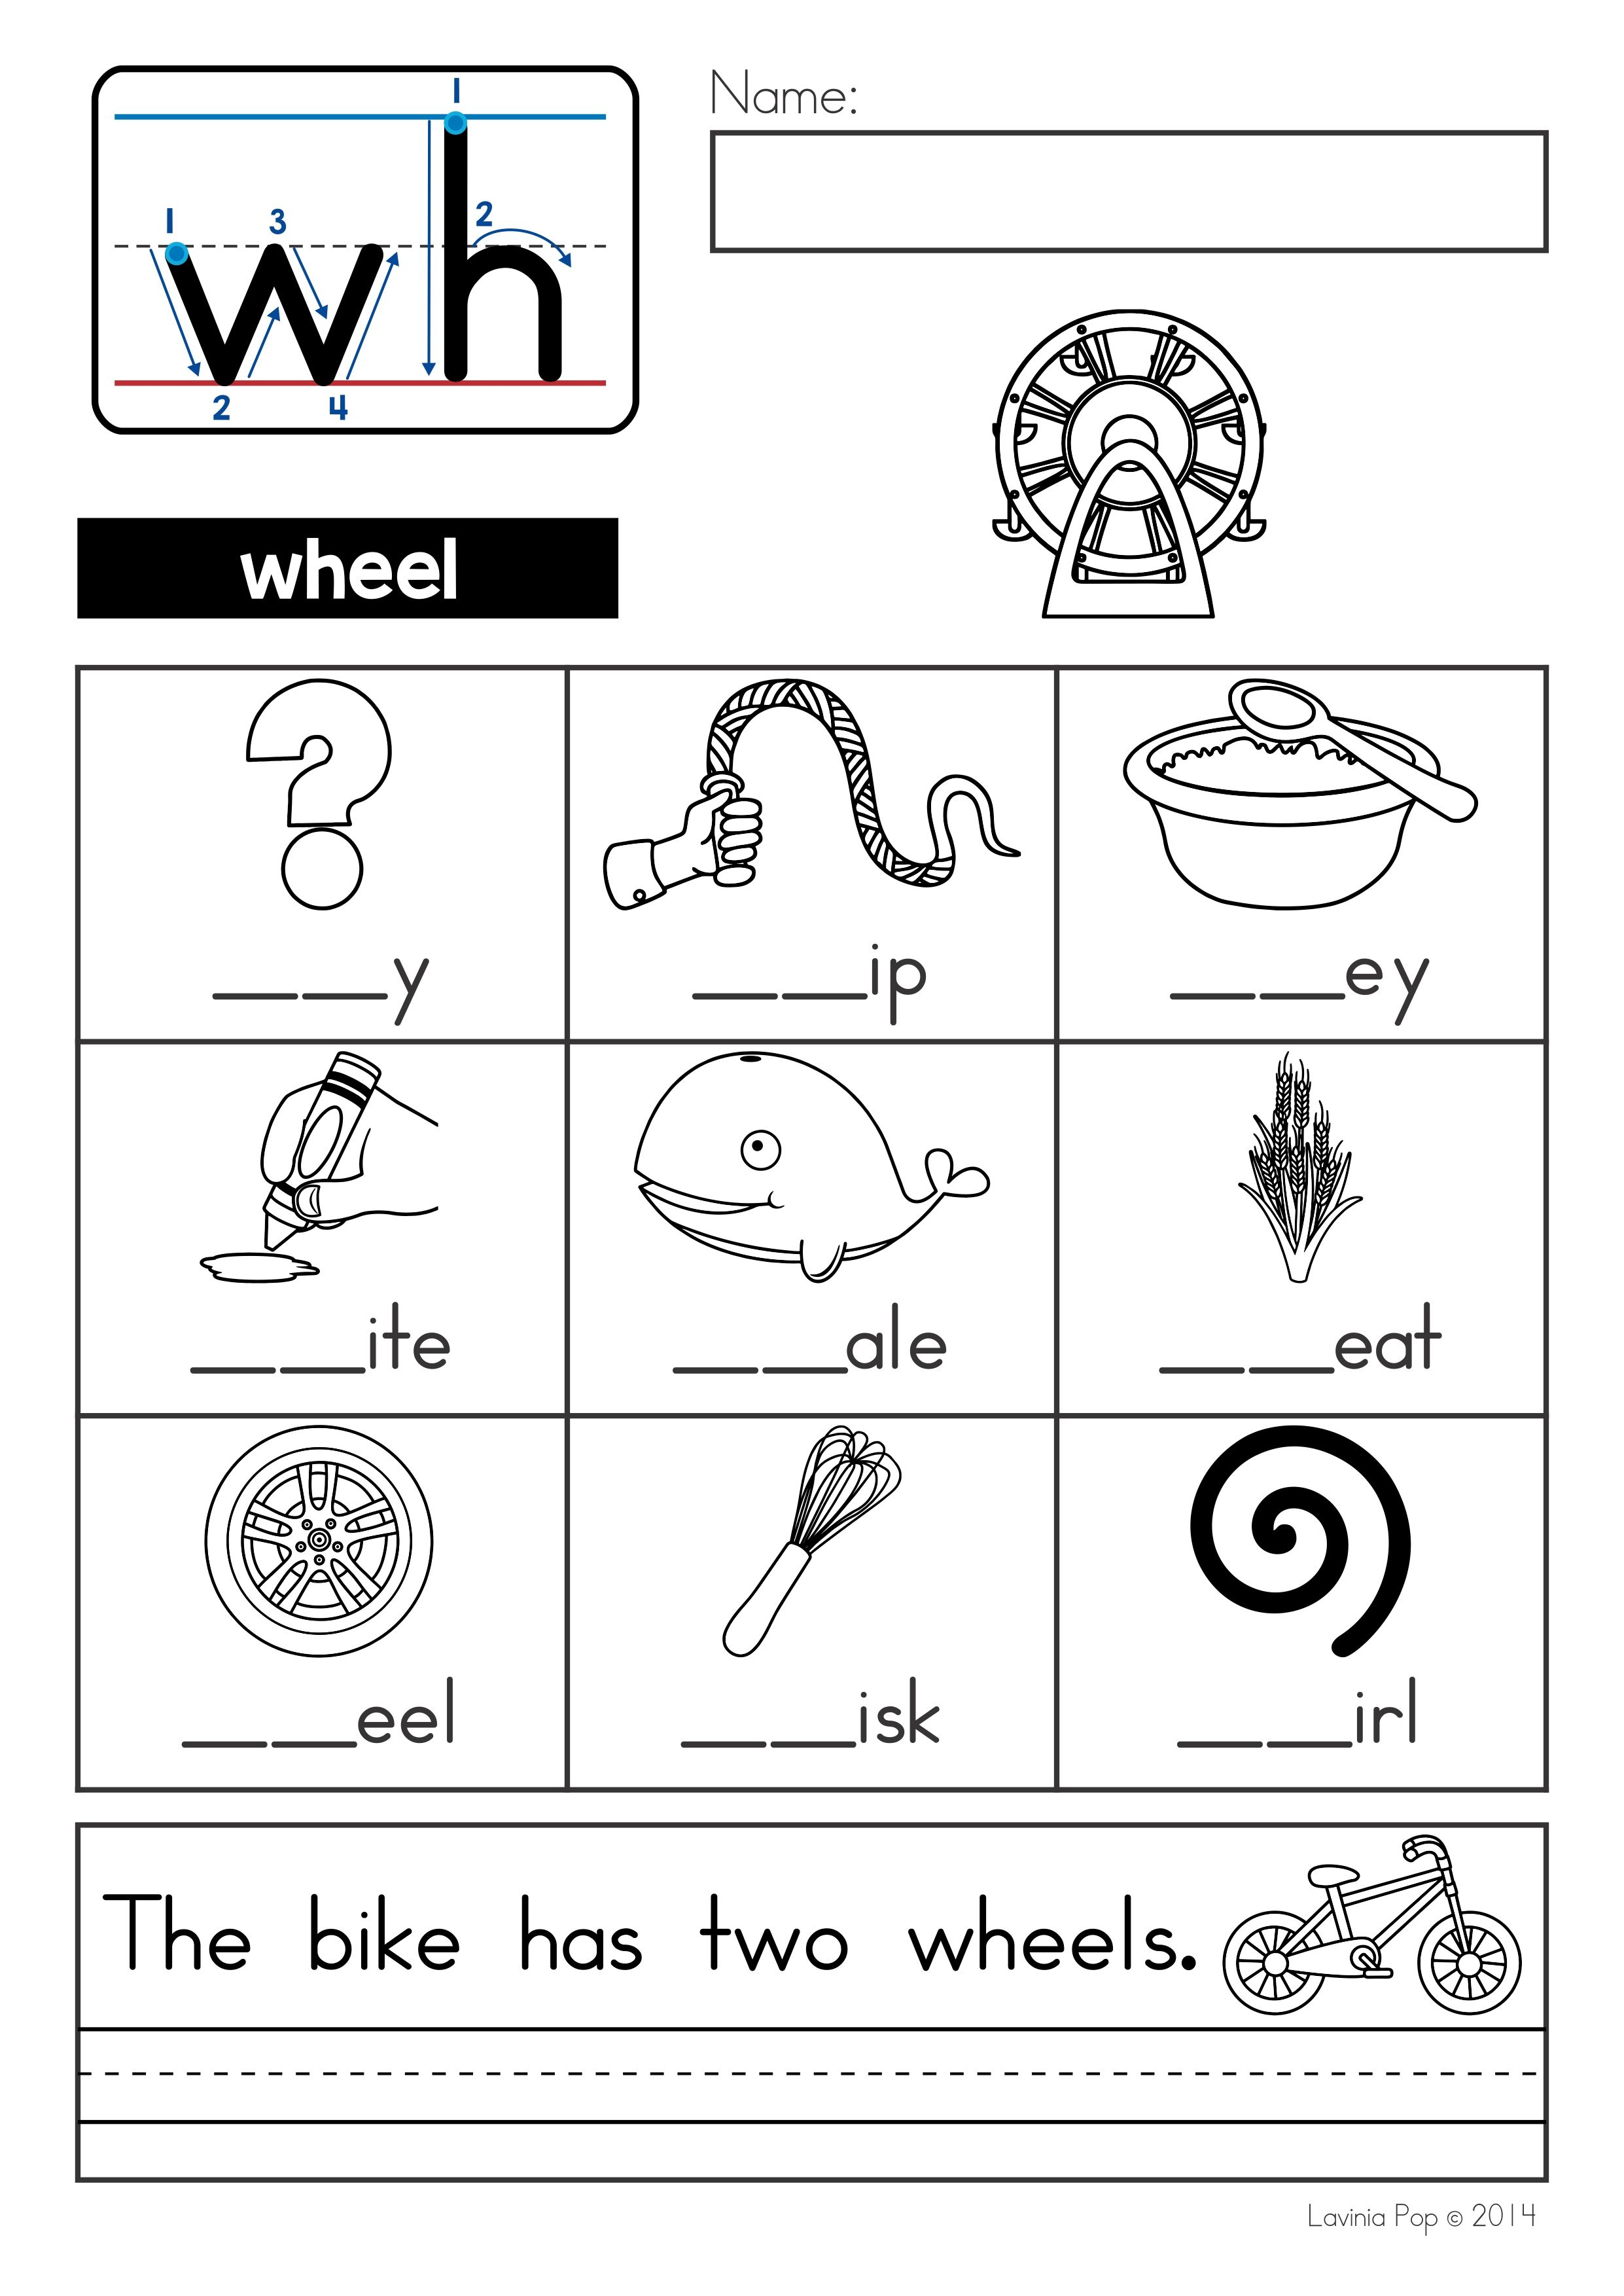 phonics activities for first grade